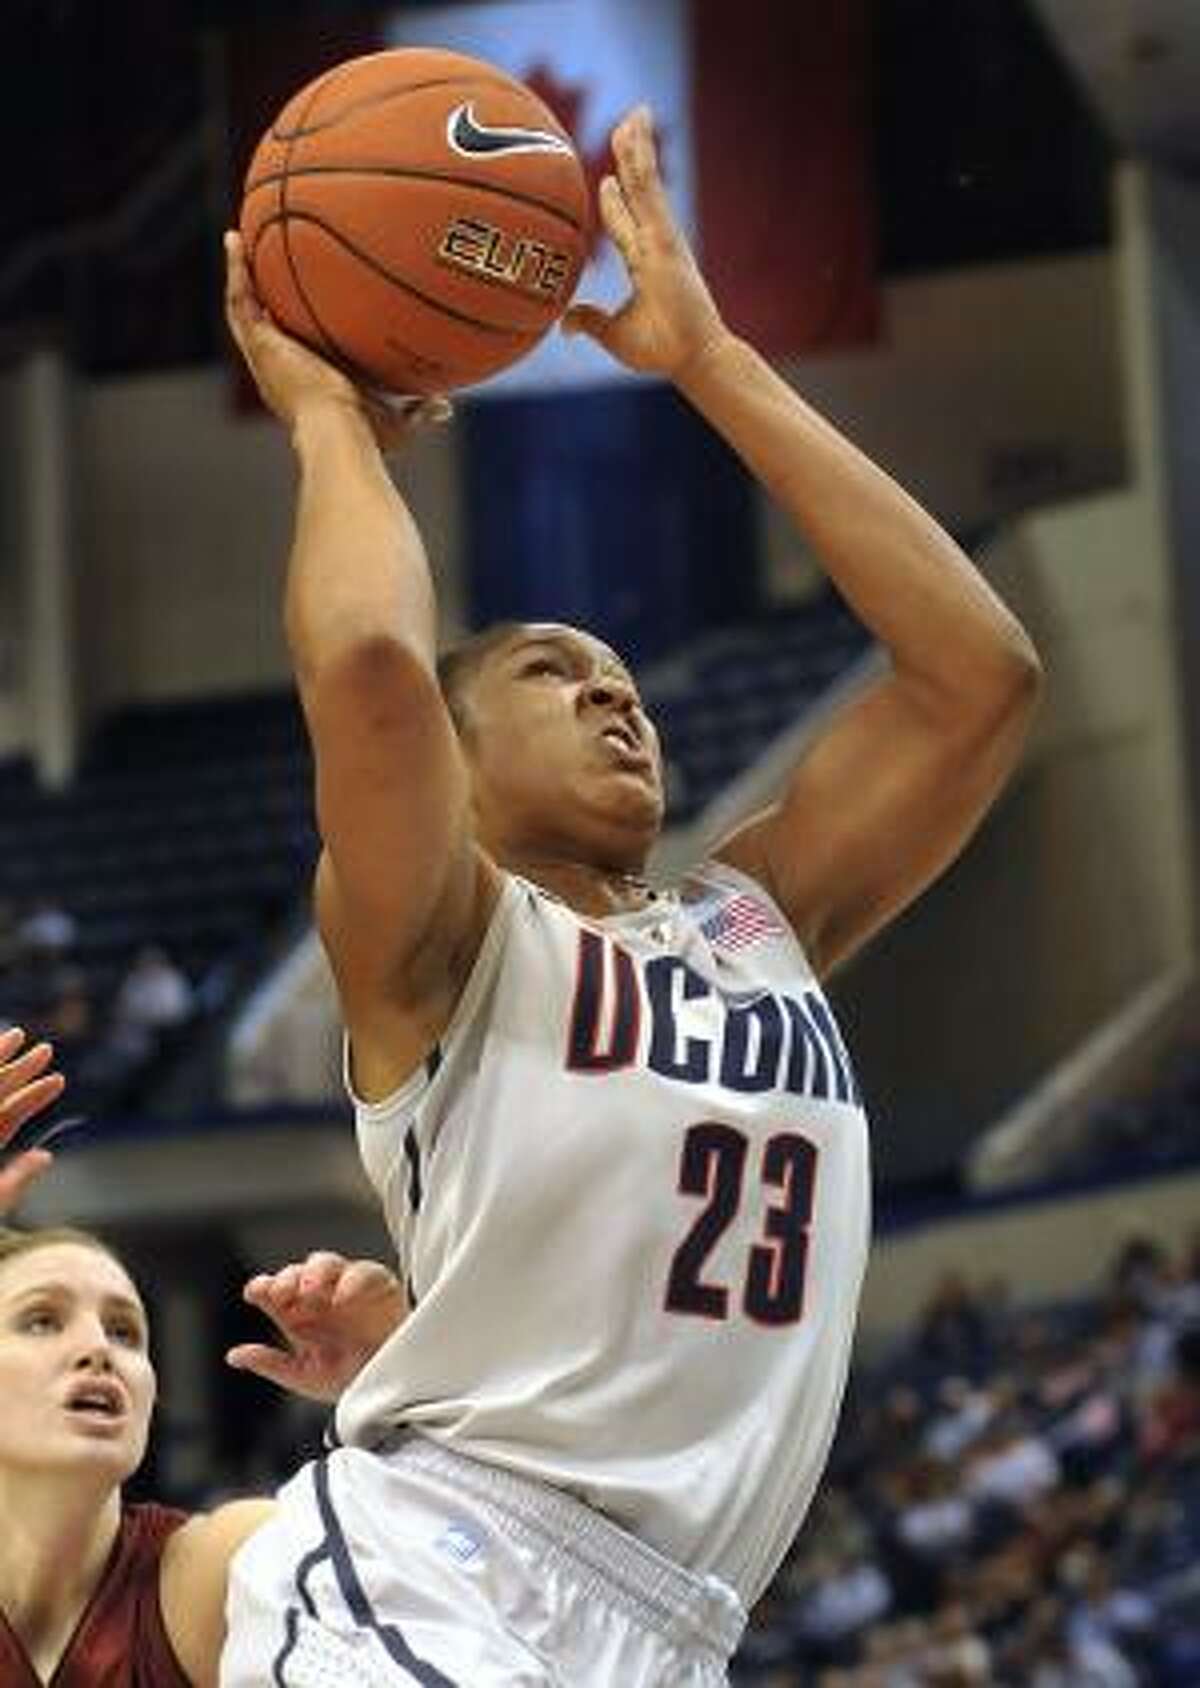 AP Connecticut's Maya Moore drives to the basket while guarded by Indiana of Pennsylvania's Brianna Johnson during the first half of a Nov. 10 exhibition game in Hartford. All-American Moore and her two-time defending champion Huskies teammates enter Sunday's season opener against Holy Cross with a record 78-game winning streak.